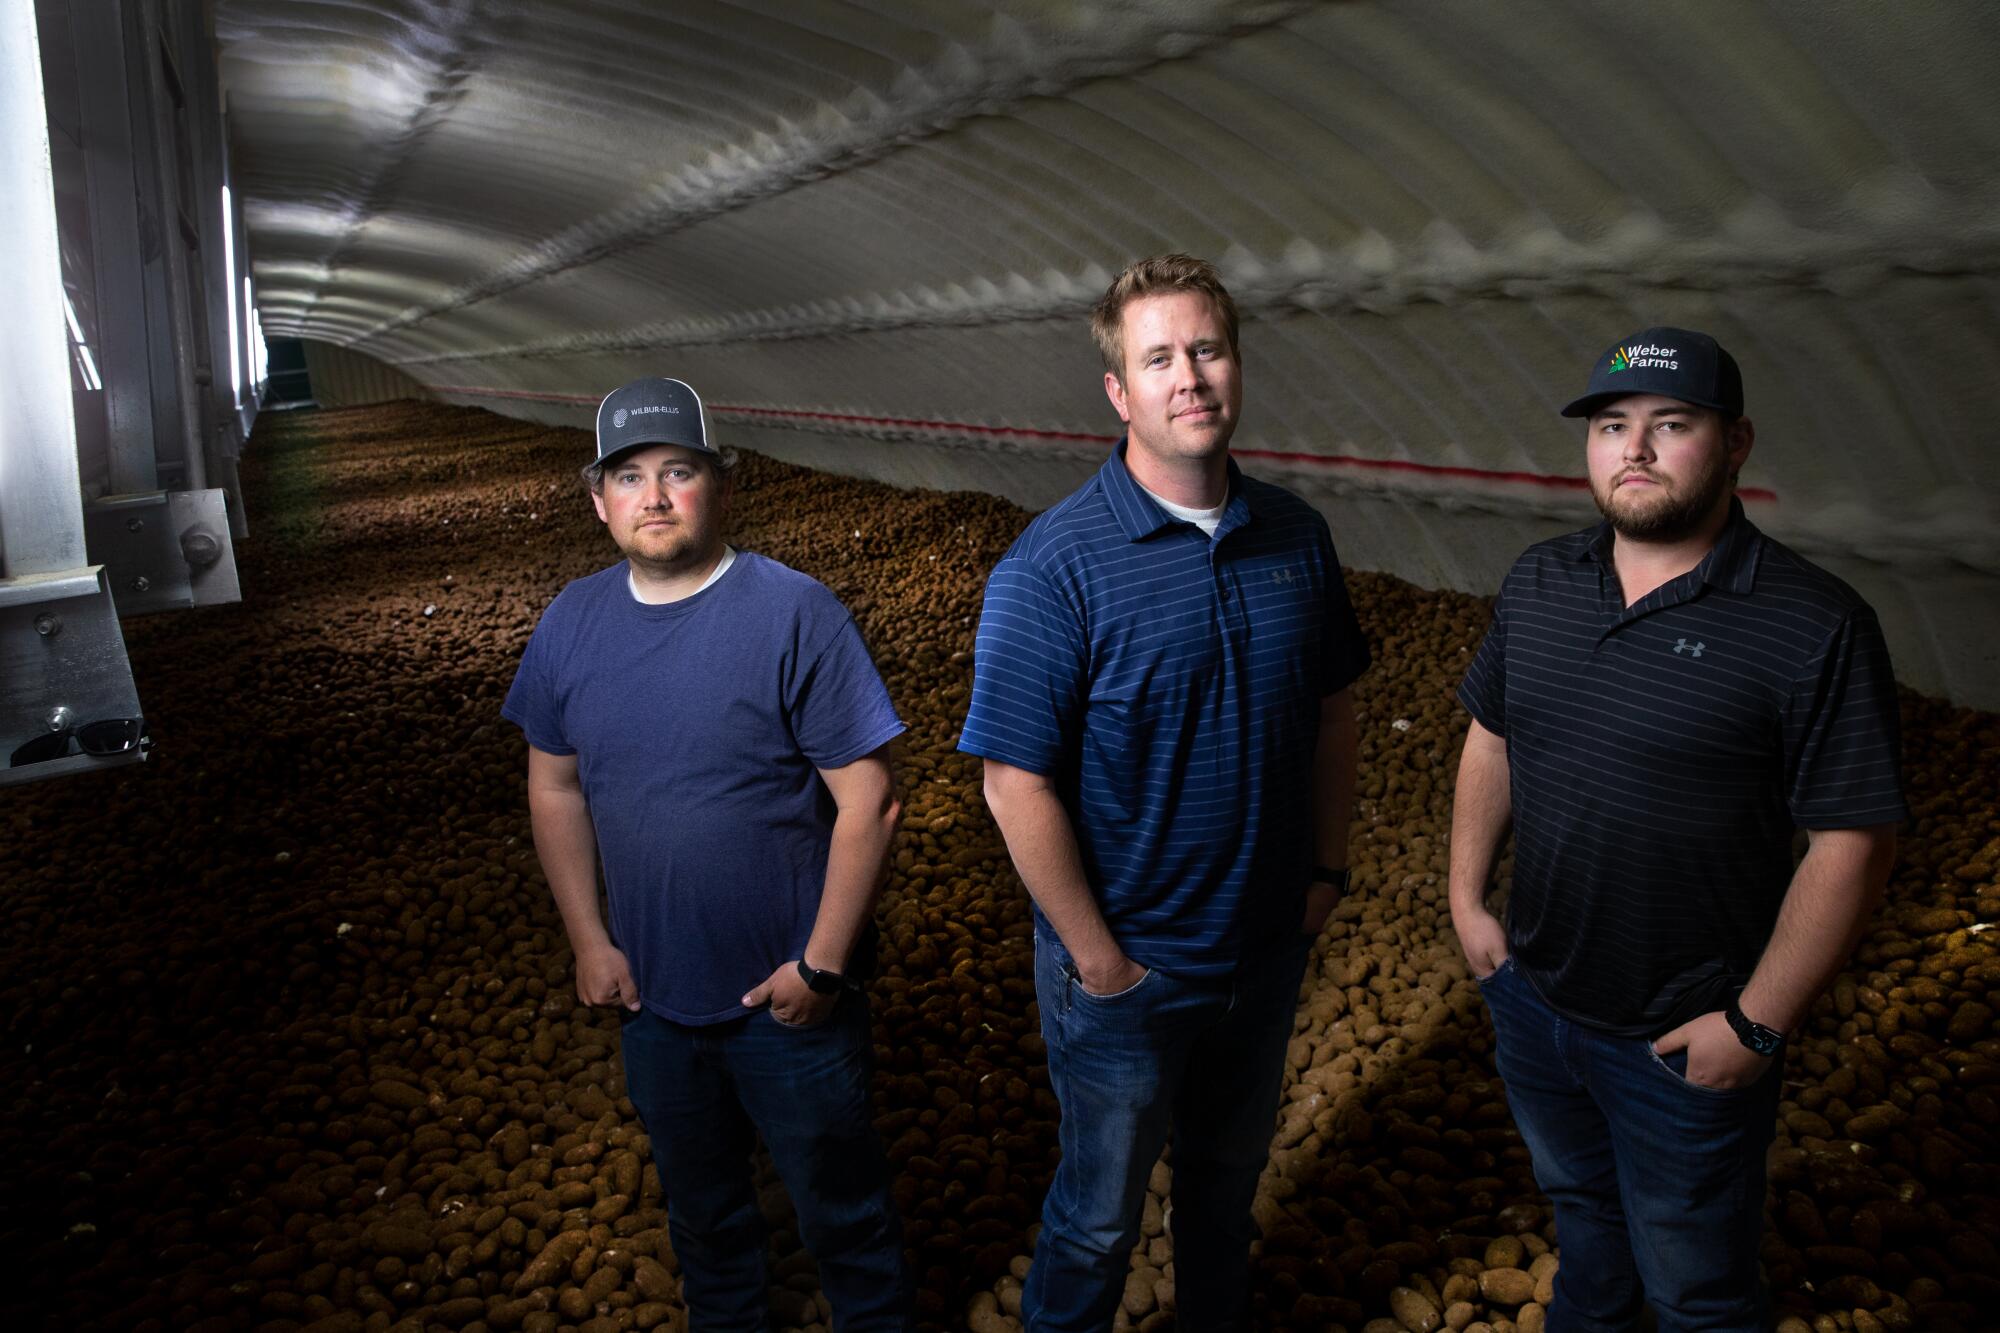 Weber Family Farms members and managers Deven Johnson, left, Josh Lyebert and Adam Weber stand on $1.1 million worth of ready-to-eat russet potatoes in one of the company's refrigerated storage bays in Quincy, Wash.